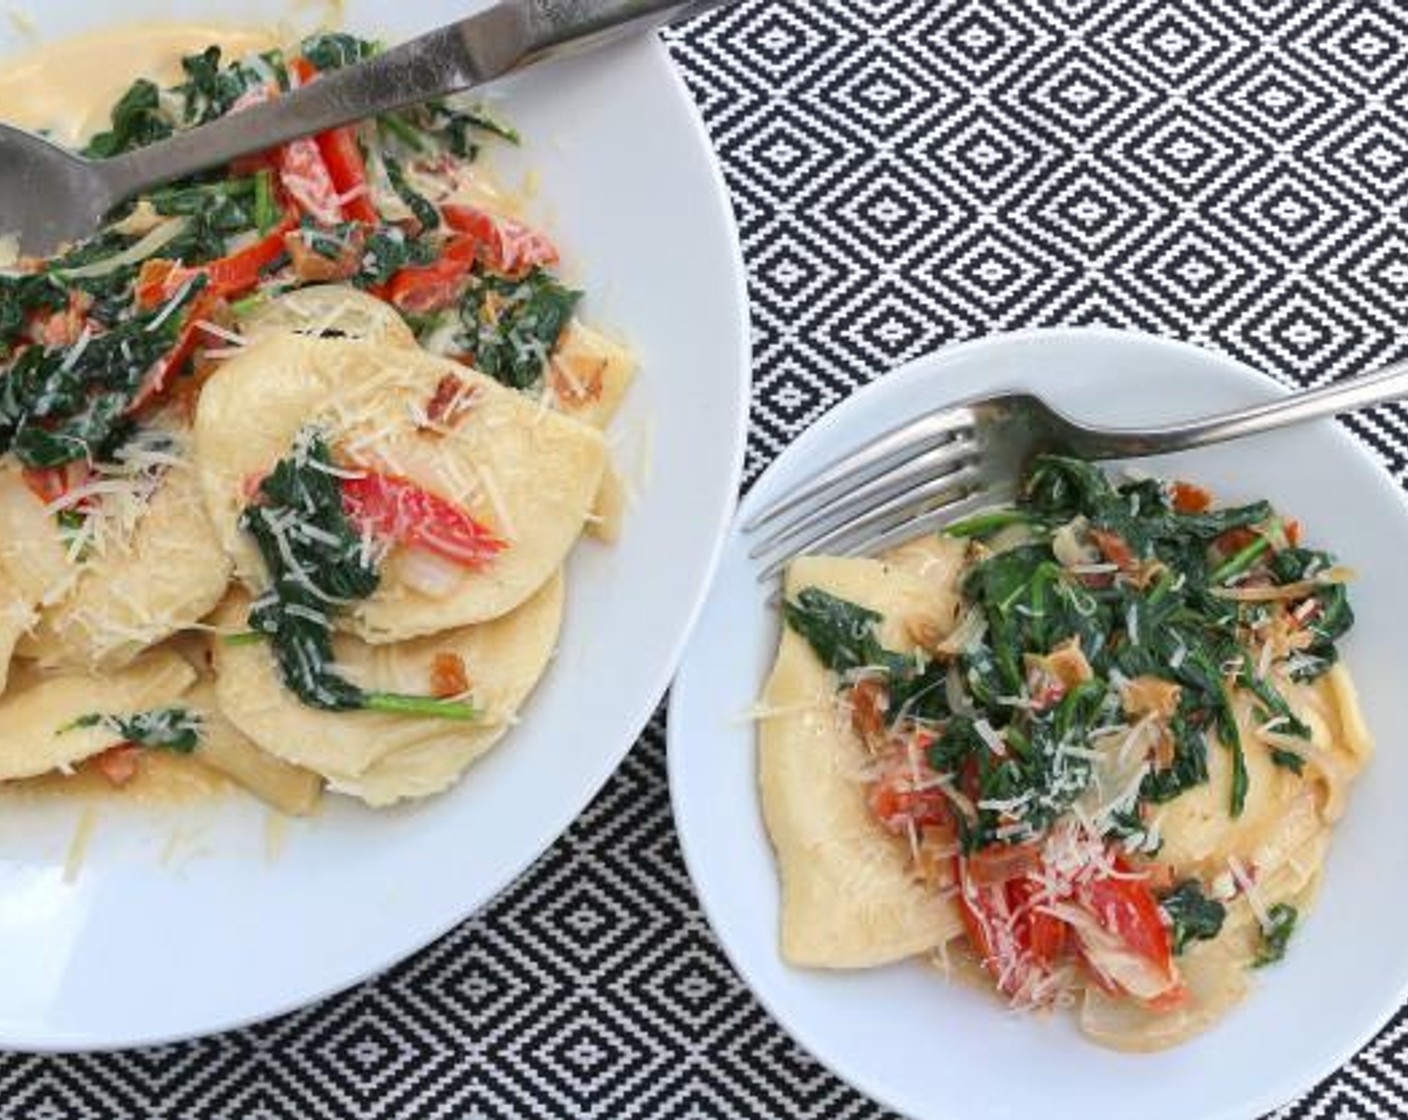 Cheese and Potato Vareniki, with Spinach, Bacon and Tomato